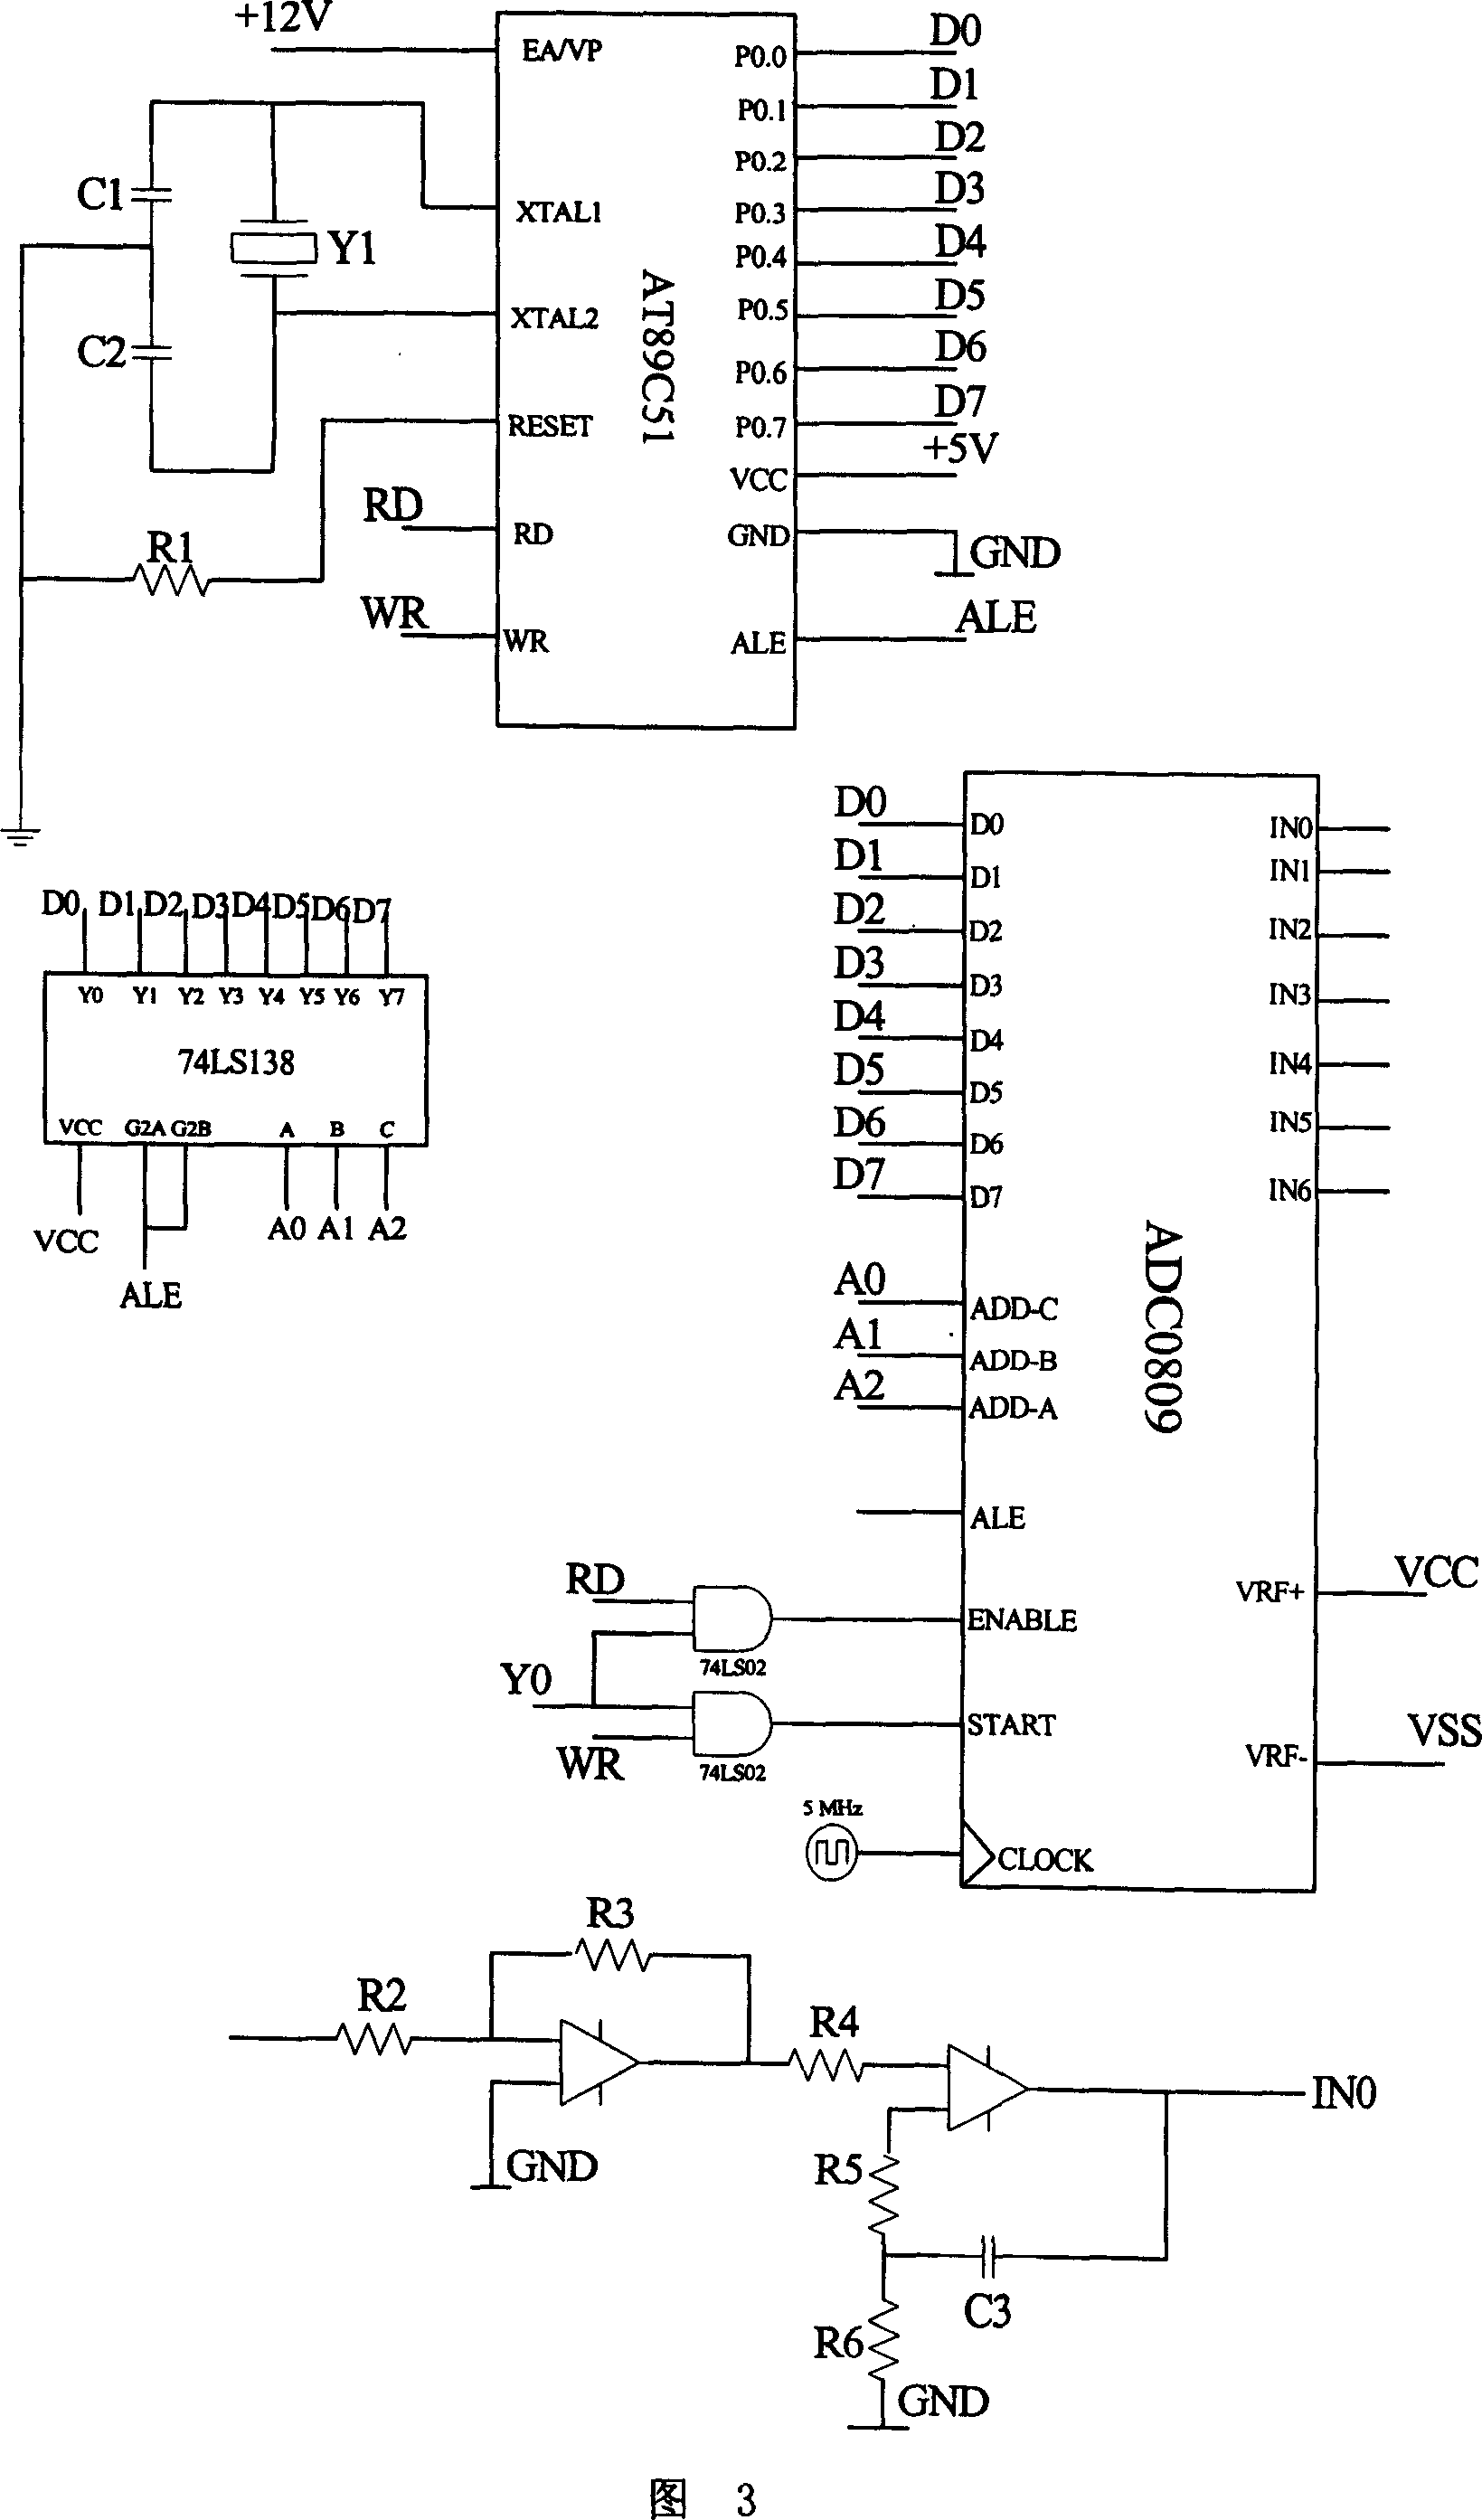 System for real-time monitoring of fatigue of driver of automobile